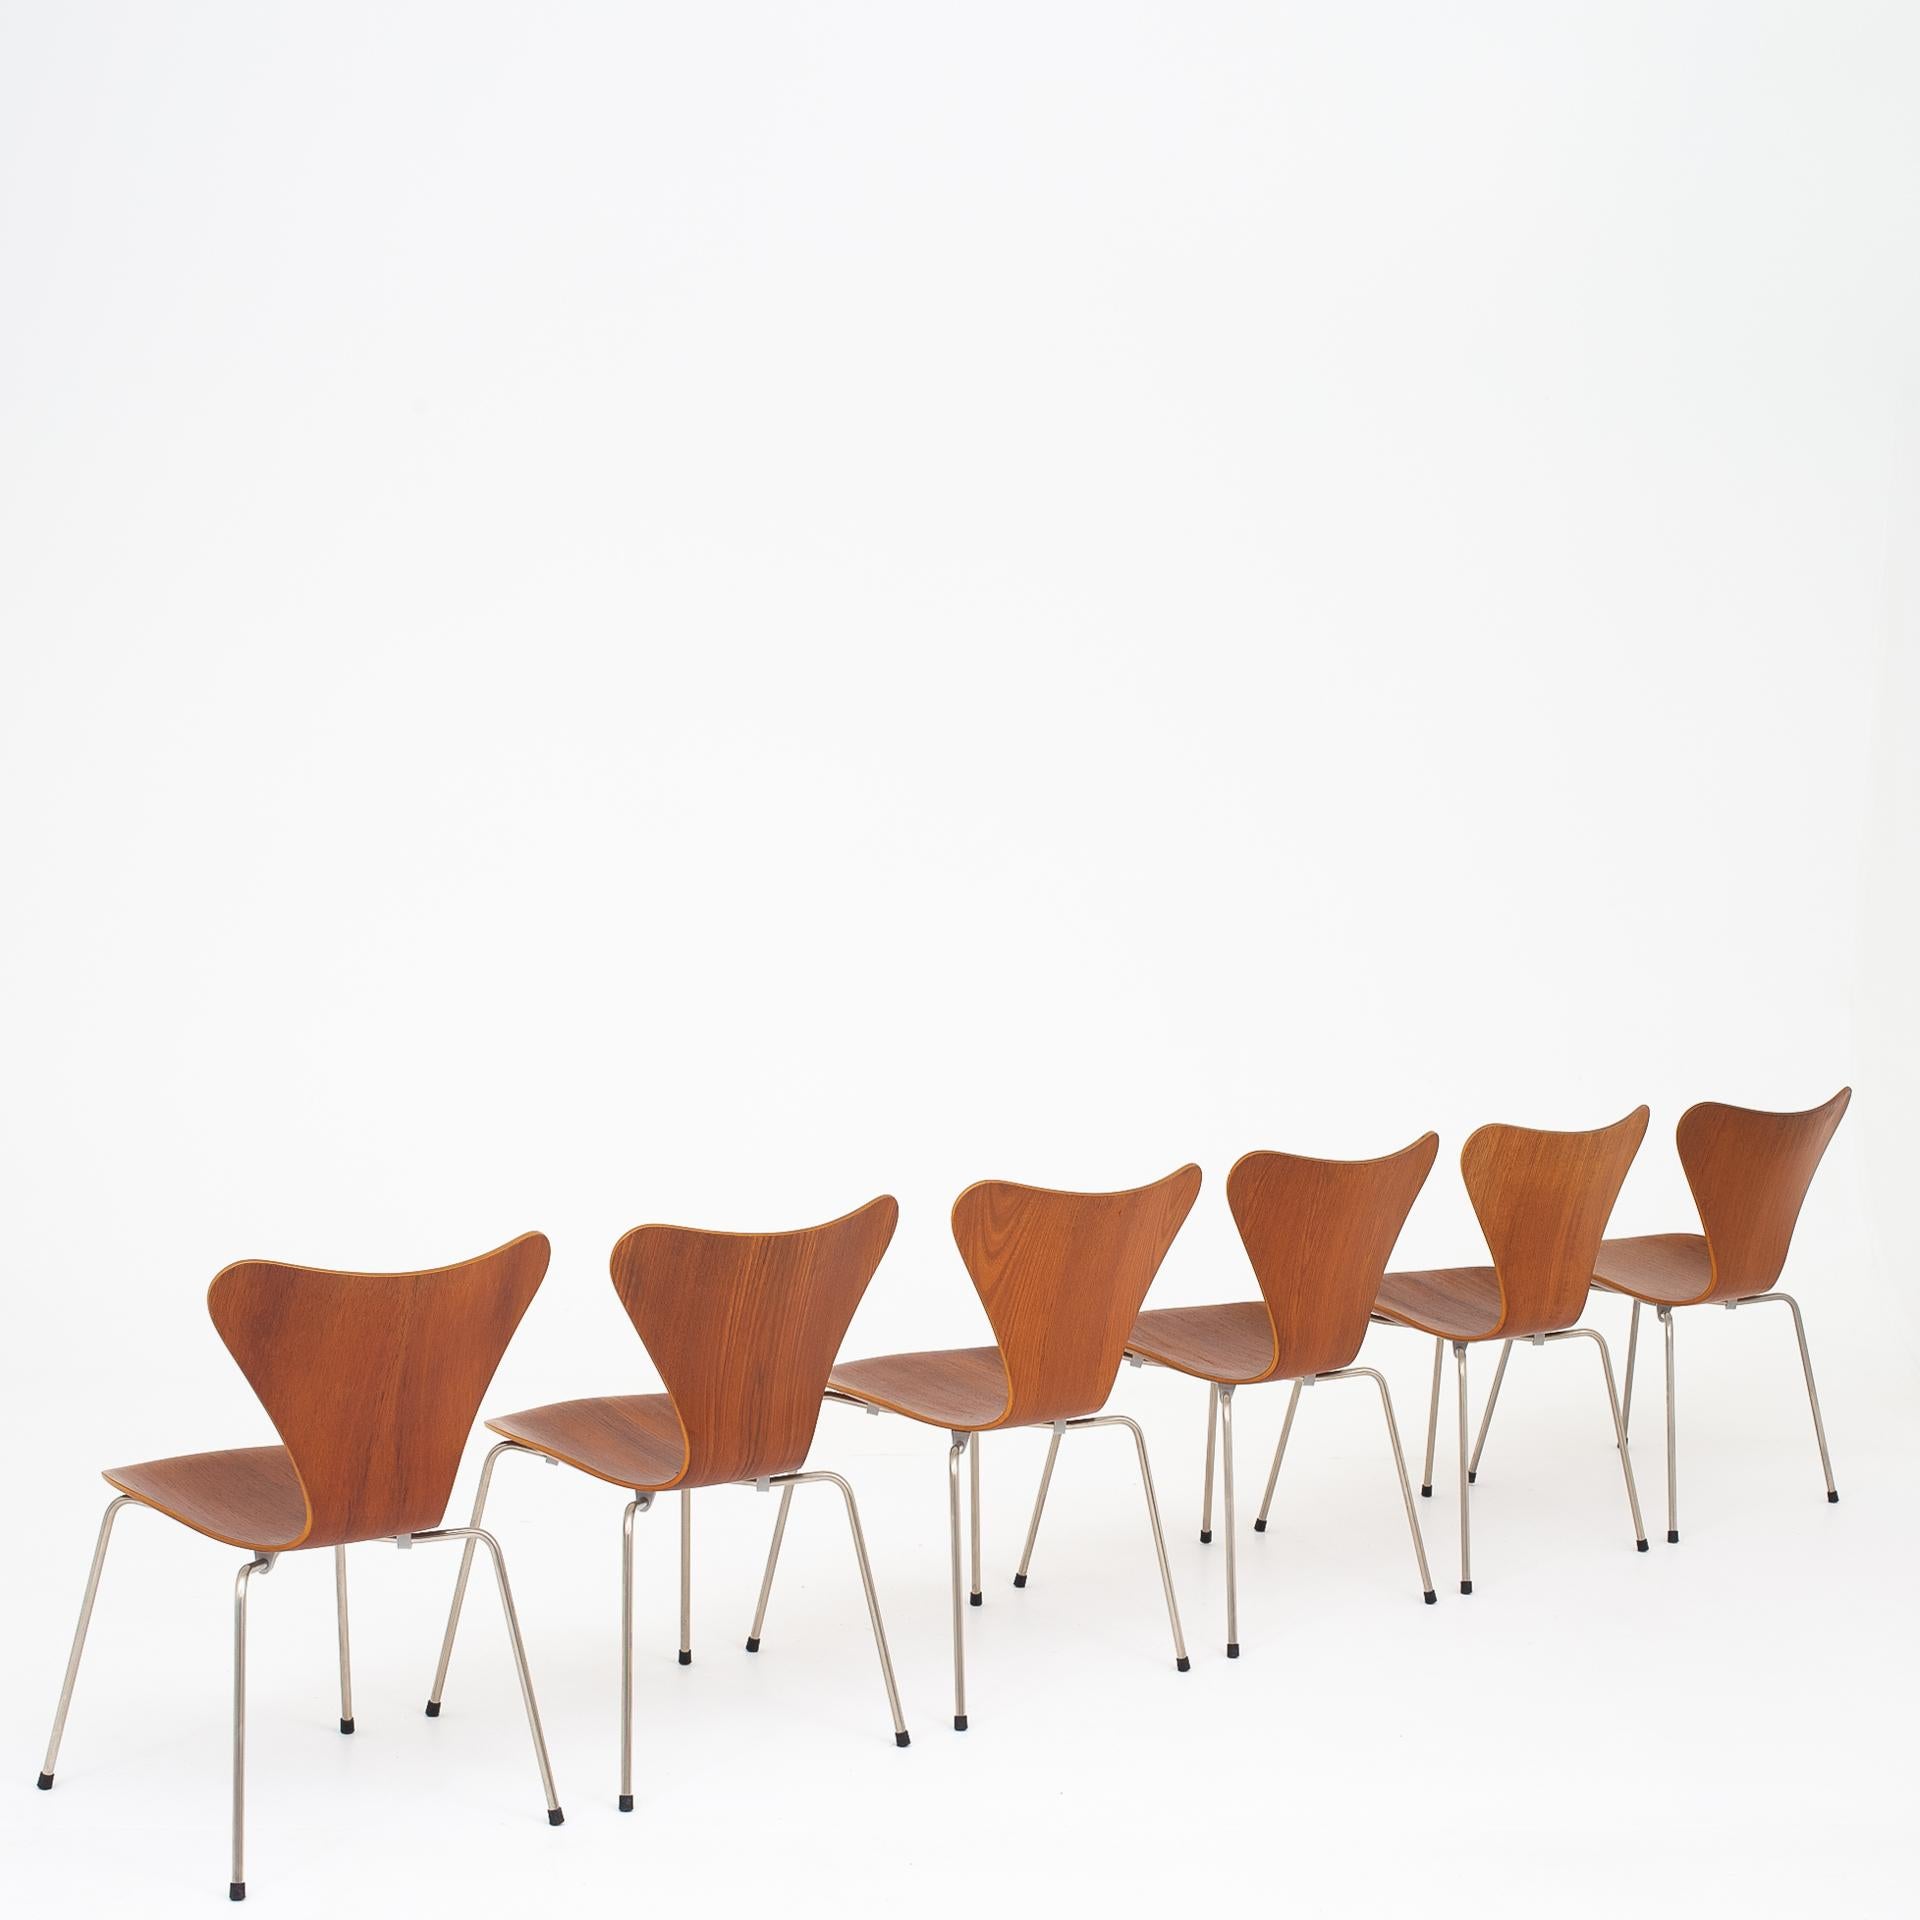 Teak Set of 6 Dining Chairs by Arne Jacobsen